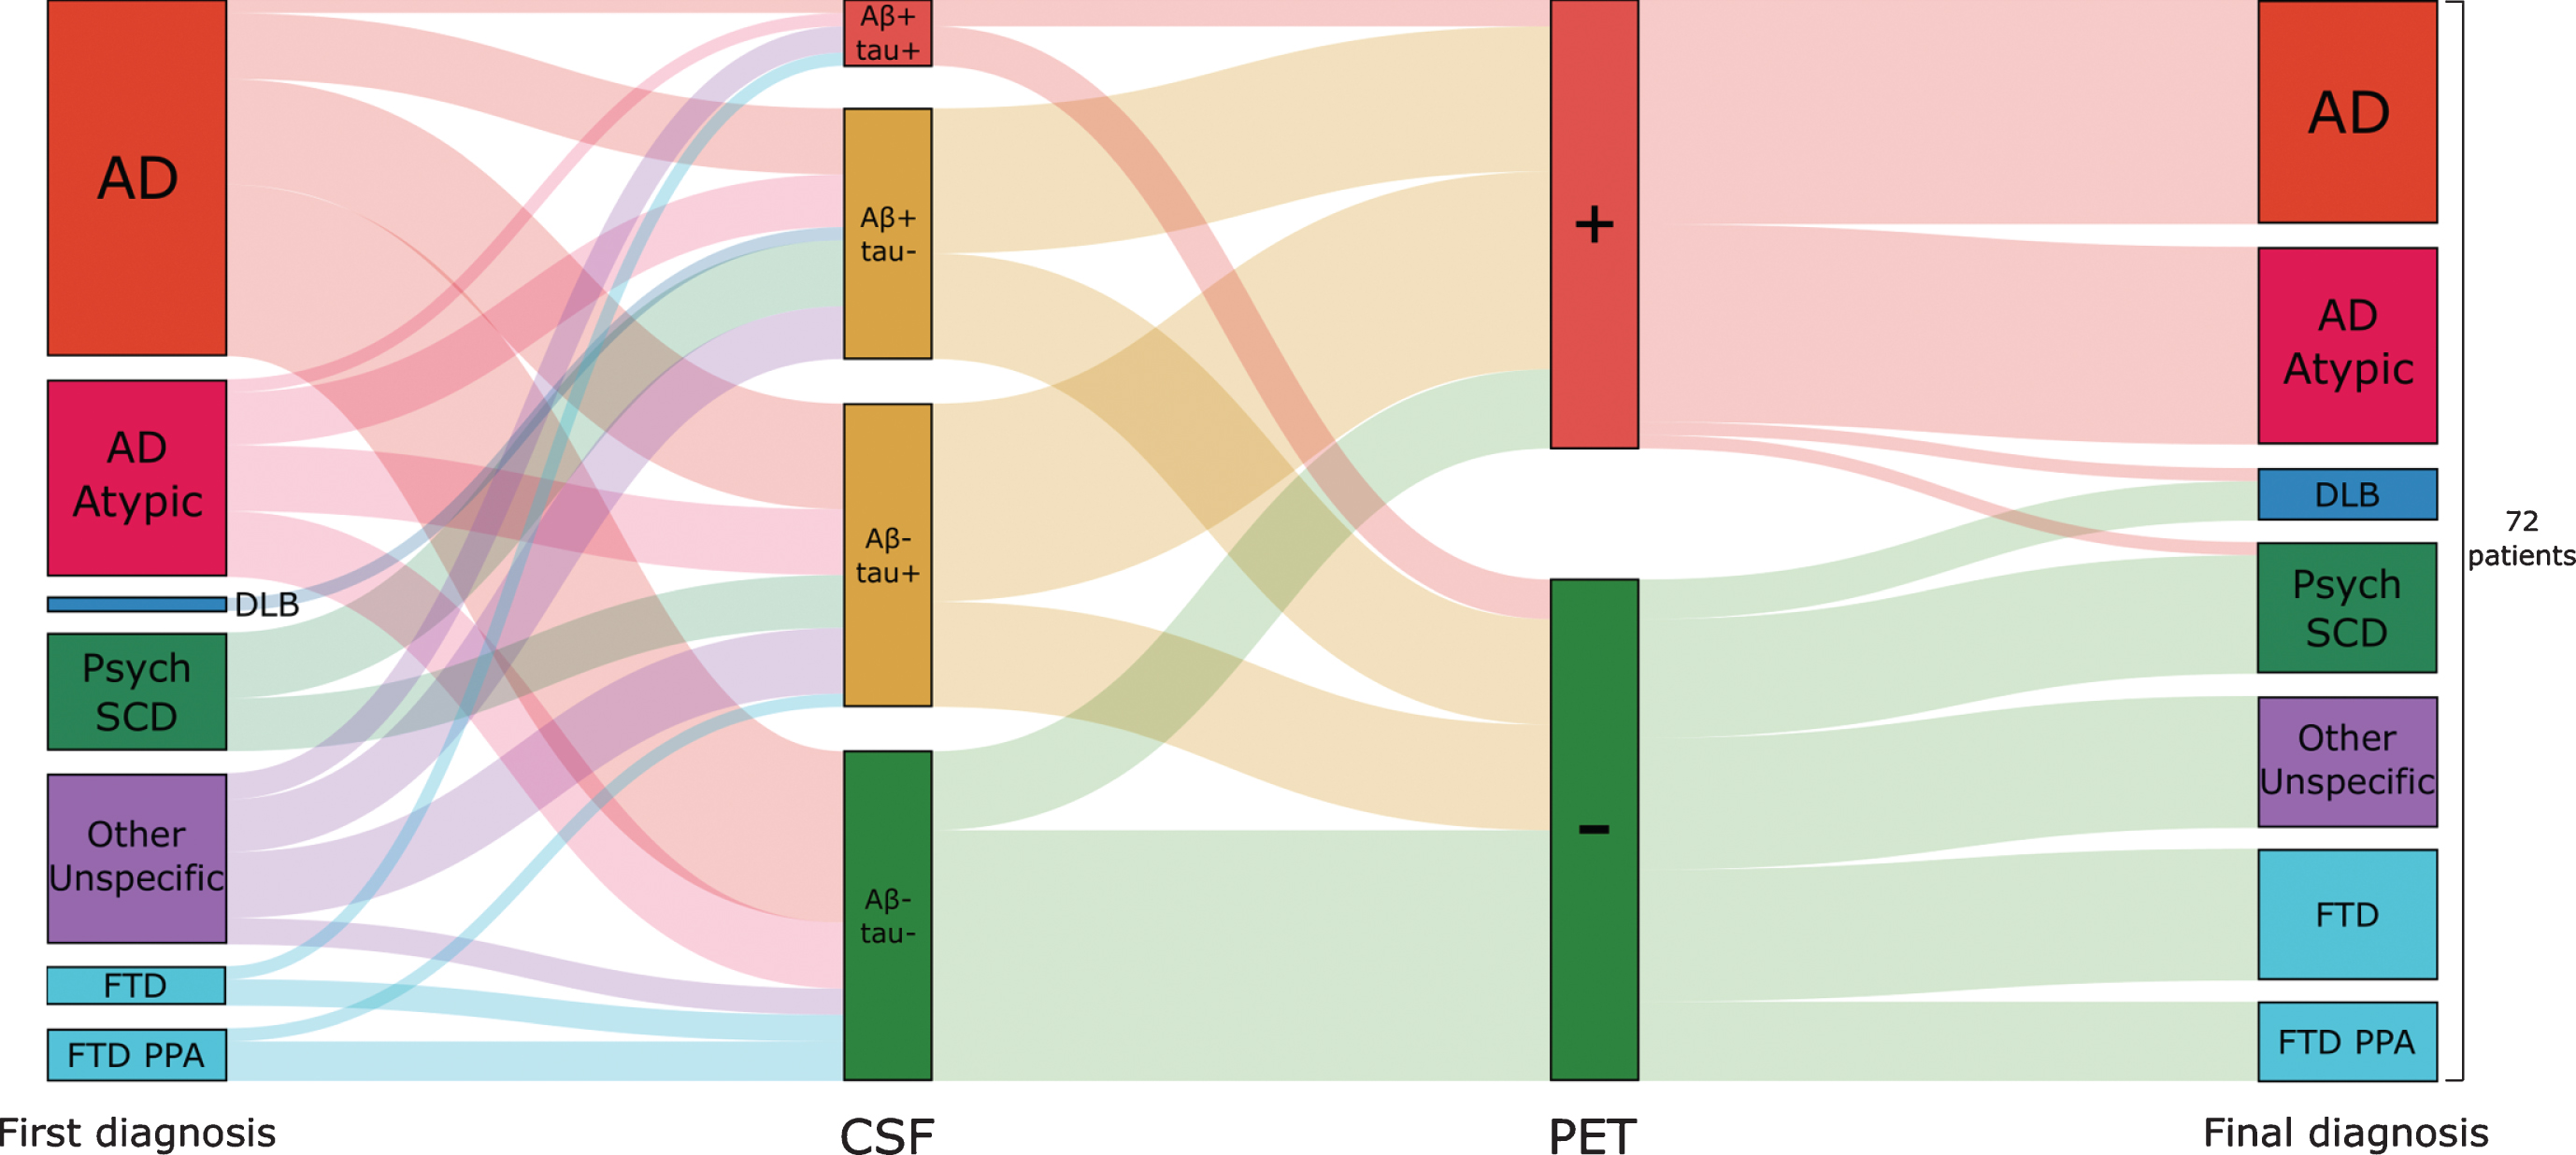 Etiological diagnosis in relation to CSF Aβ/tau status and amyloid-β PET. A Sankey diagram showing 1) the distribution of baseline diagnoses to groups based on CSF Aβ/tau status, 2) the percentage of amyloid-β PET positivity by CSF Aβ/tau groups, and 3) the correlation of final diagnosis to amyloid-β PET positivity. DLB, dementia with Lewy bodies; Psych, psychiatric disorder; SCD, subjective cognitive decline; FTD, frontotemporal dementia; PPA, primary progressive aphasia.